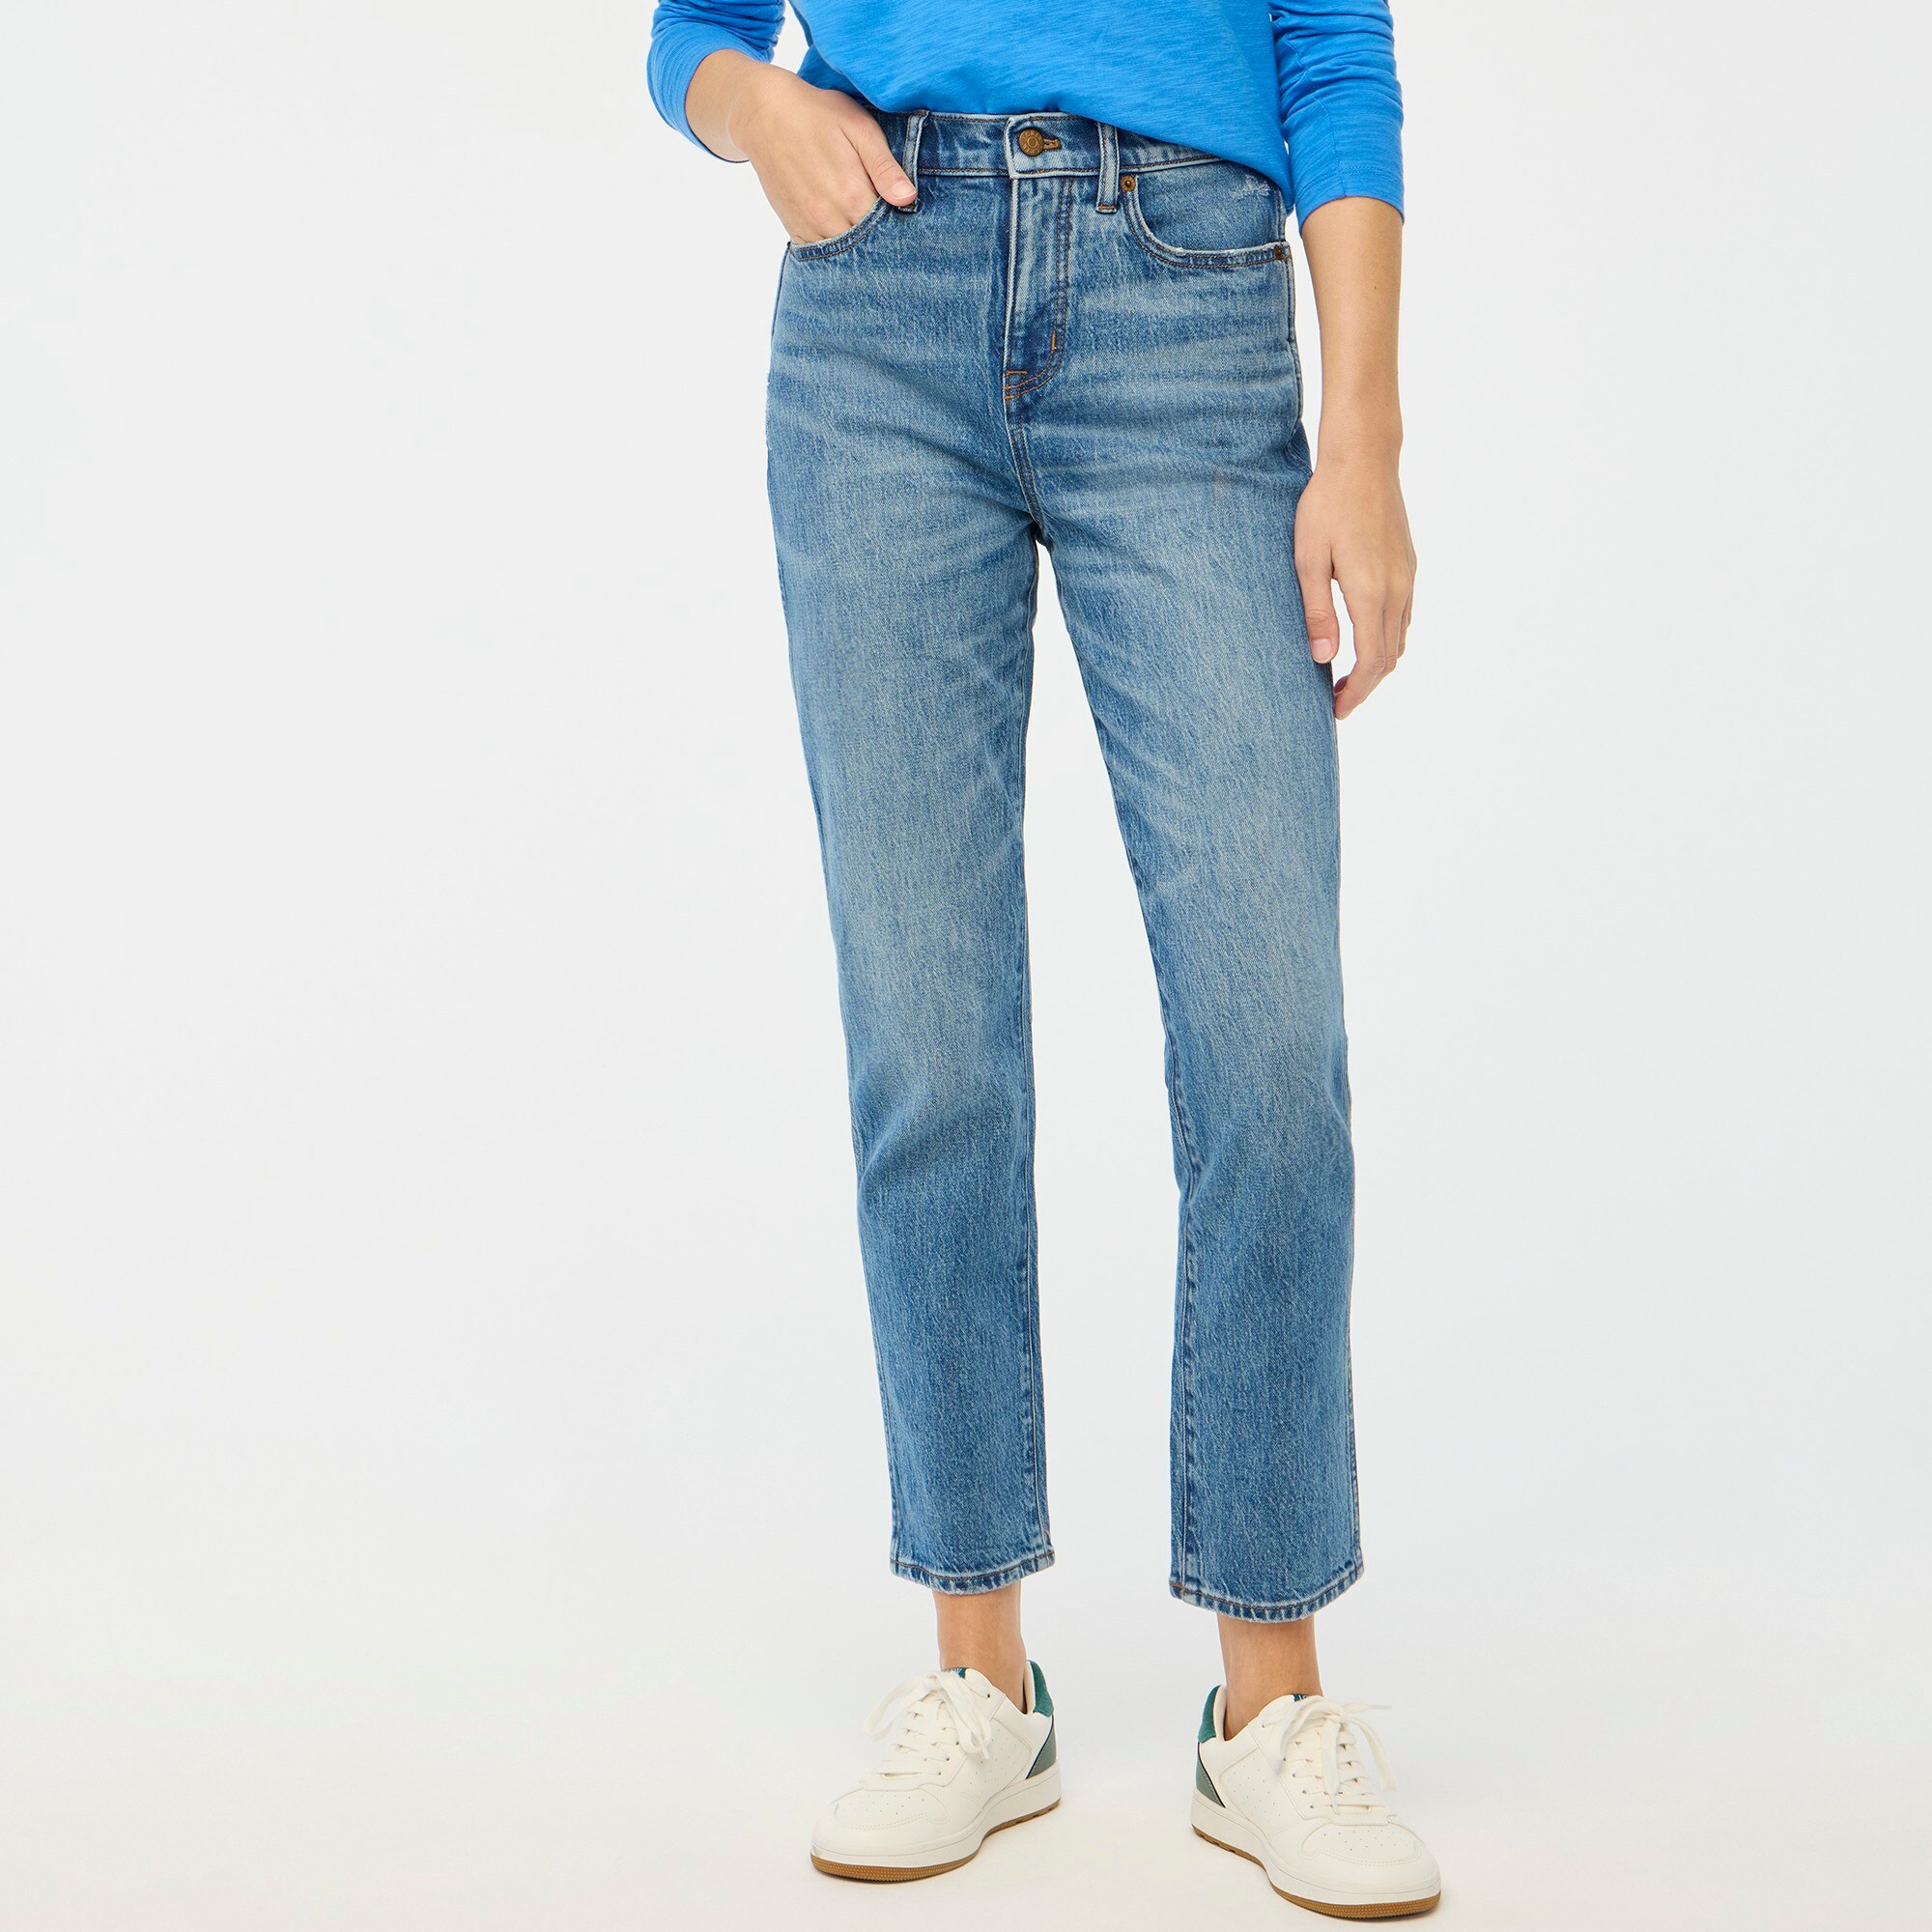 Jcrew Classic vintage jean in all-day stretch